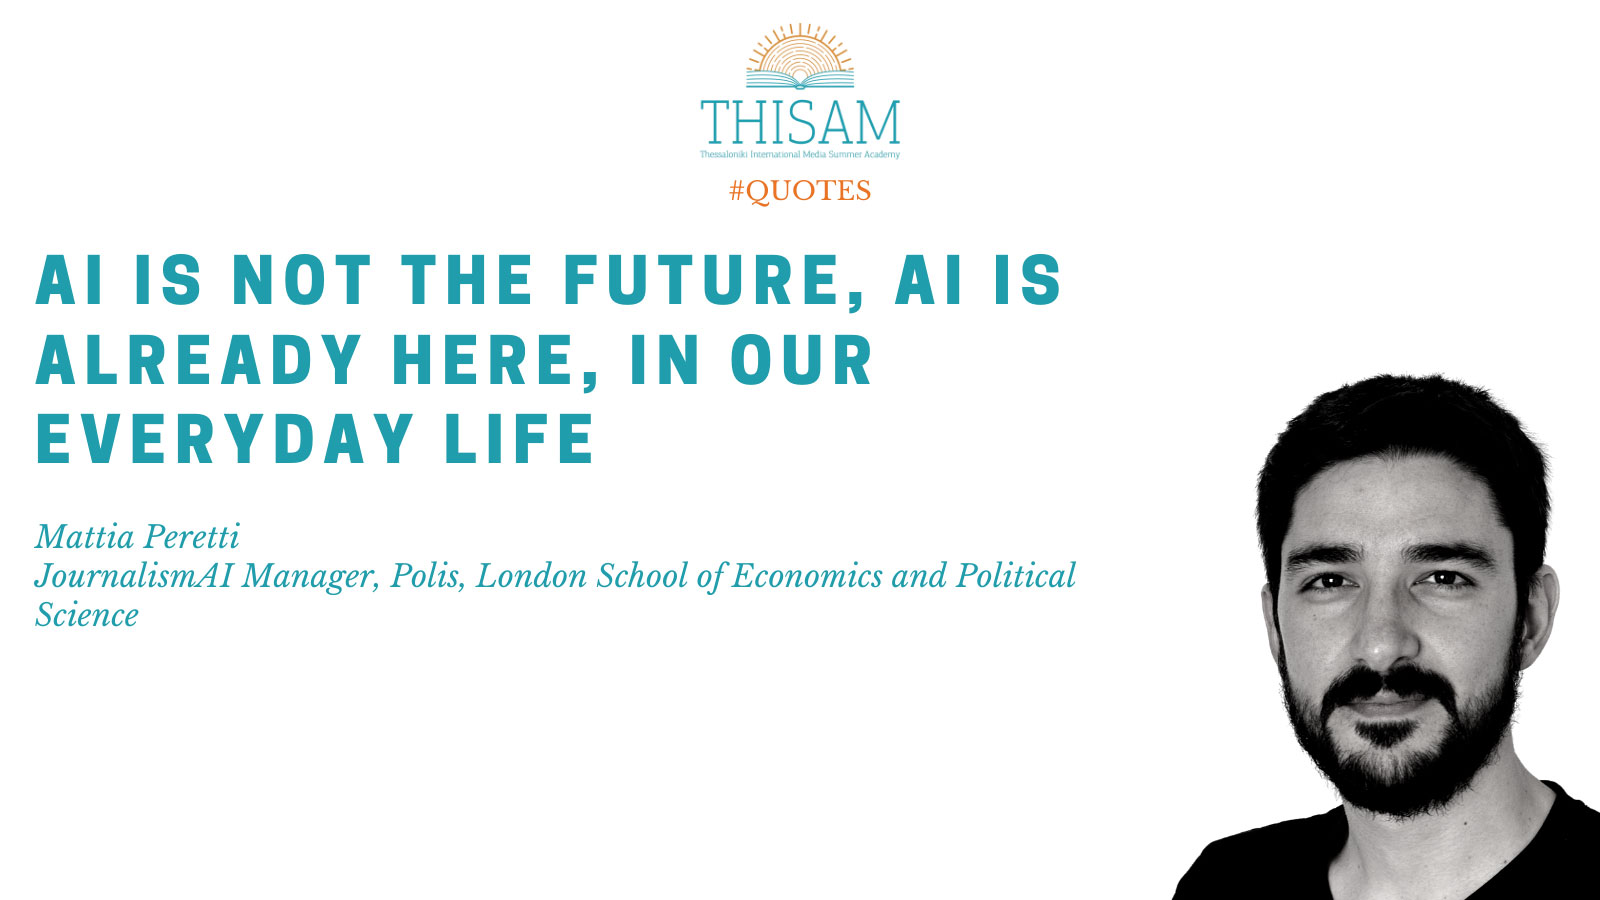 THISAM Talks: "What does ‘Artificial Intelligence’ mean for journalism?"